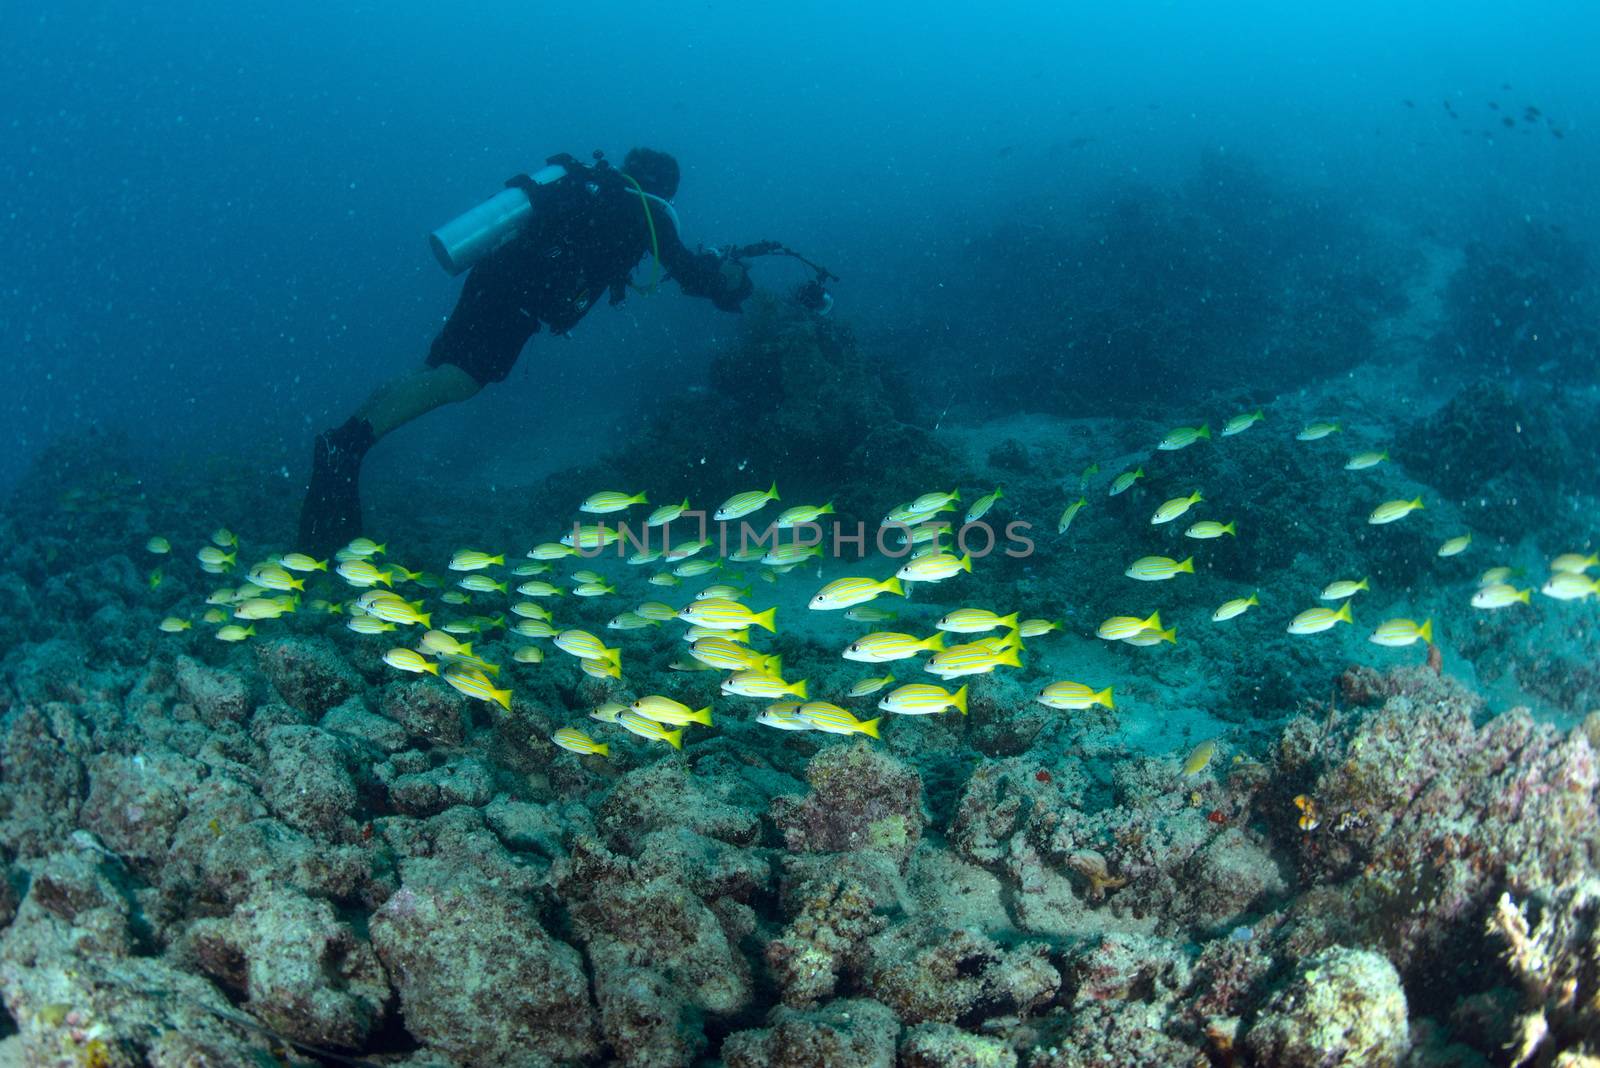 School Yellow snapper Fish and diver in Sipadan, Malaysia by think4photop